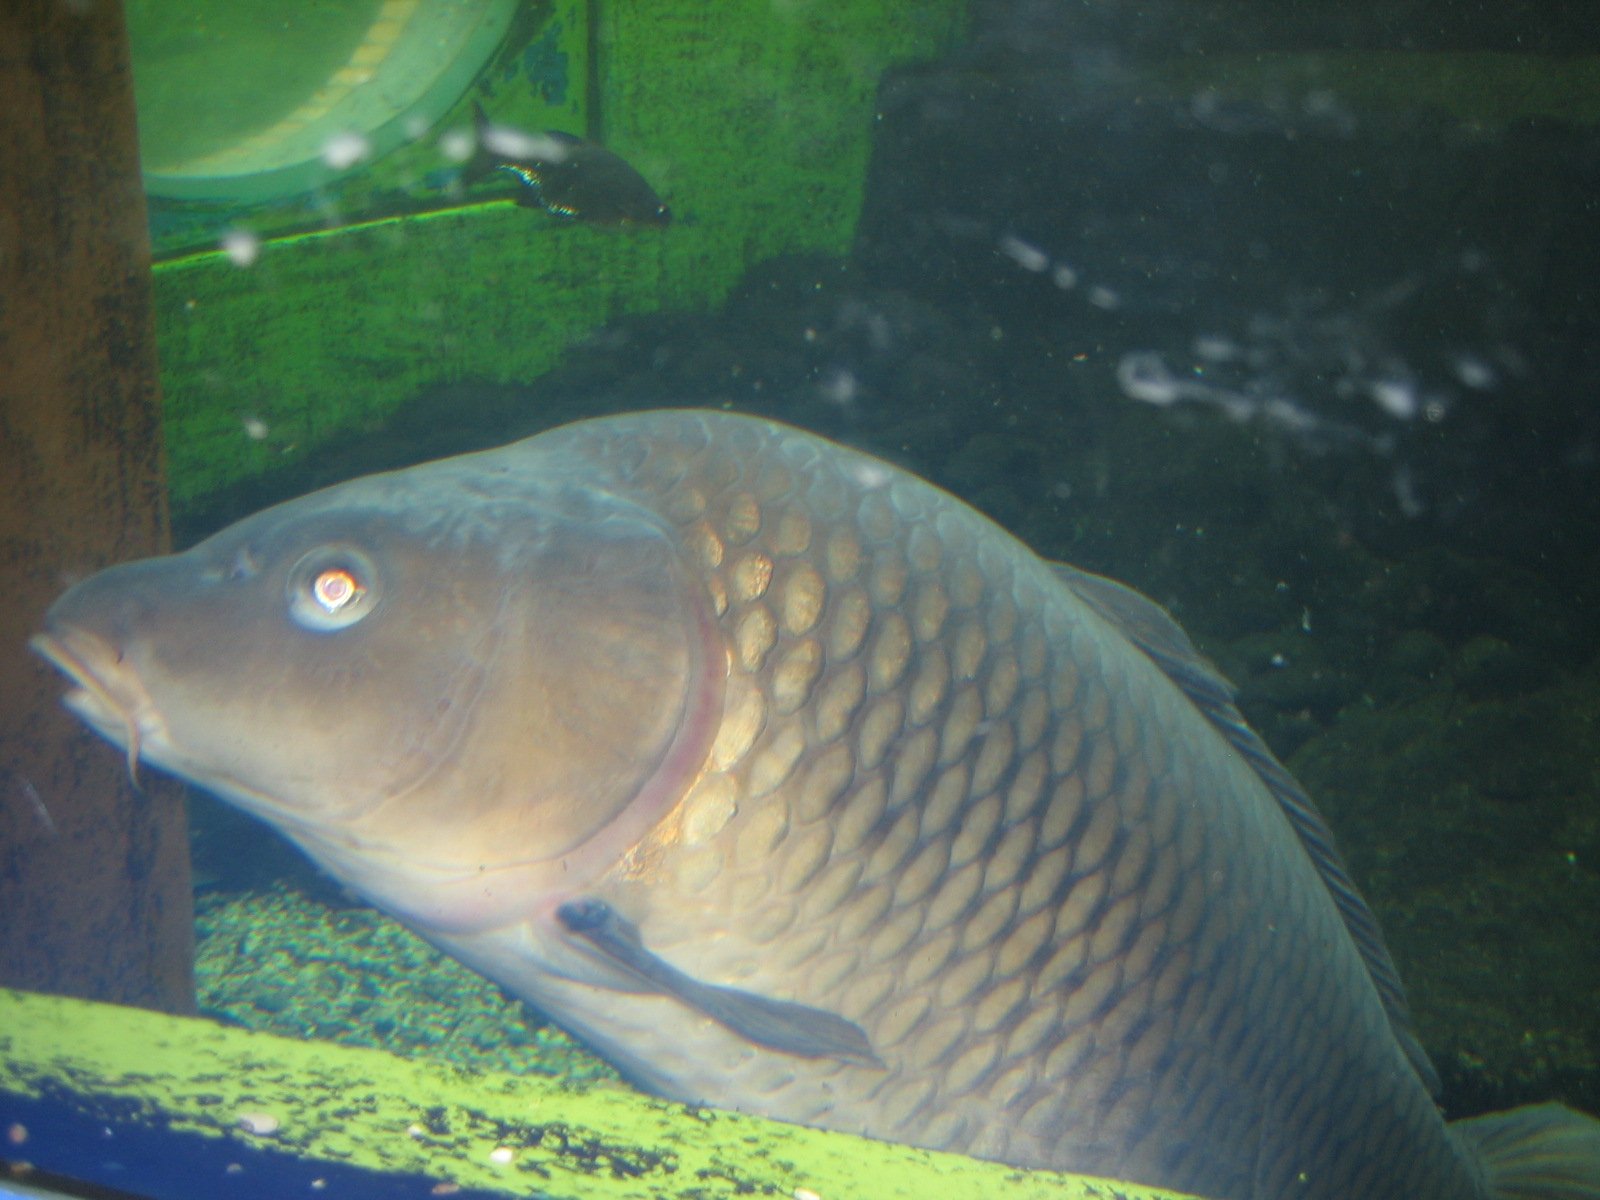 Image of carp after eating particles